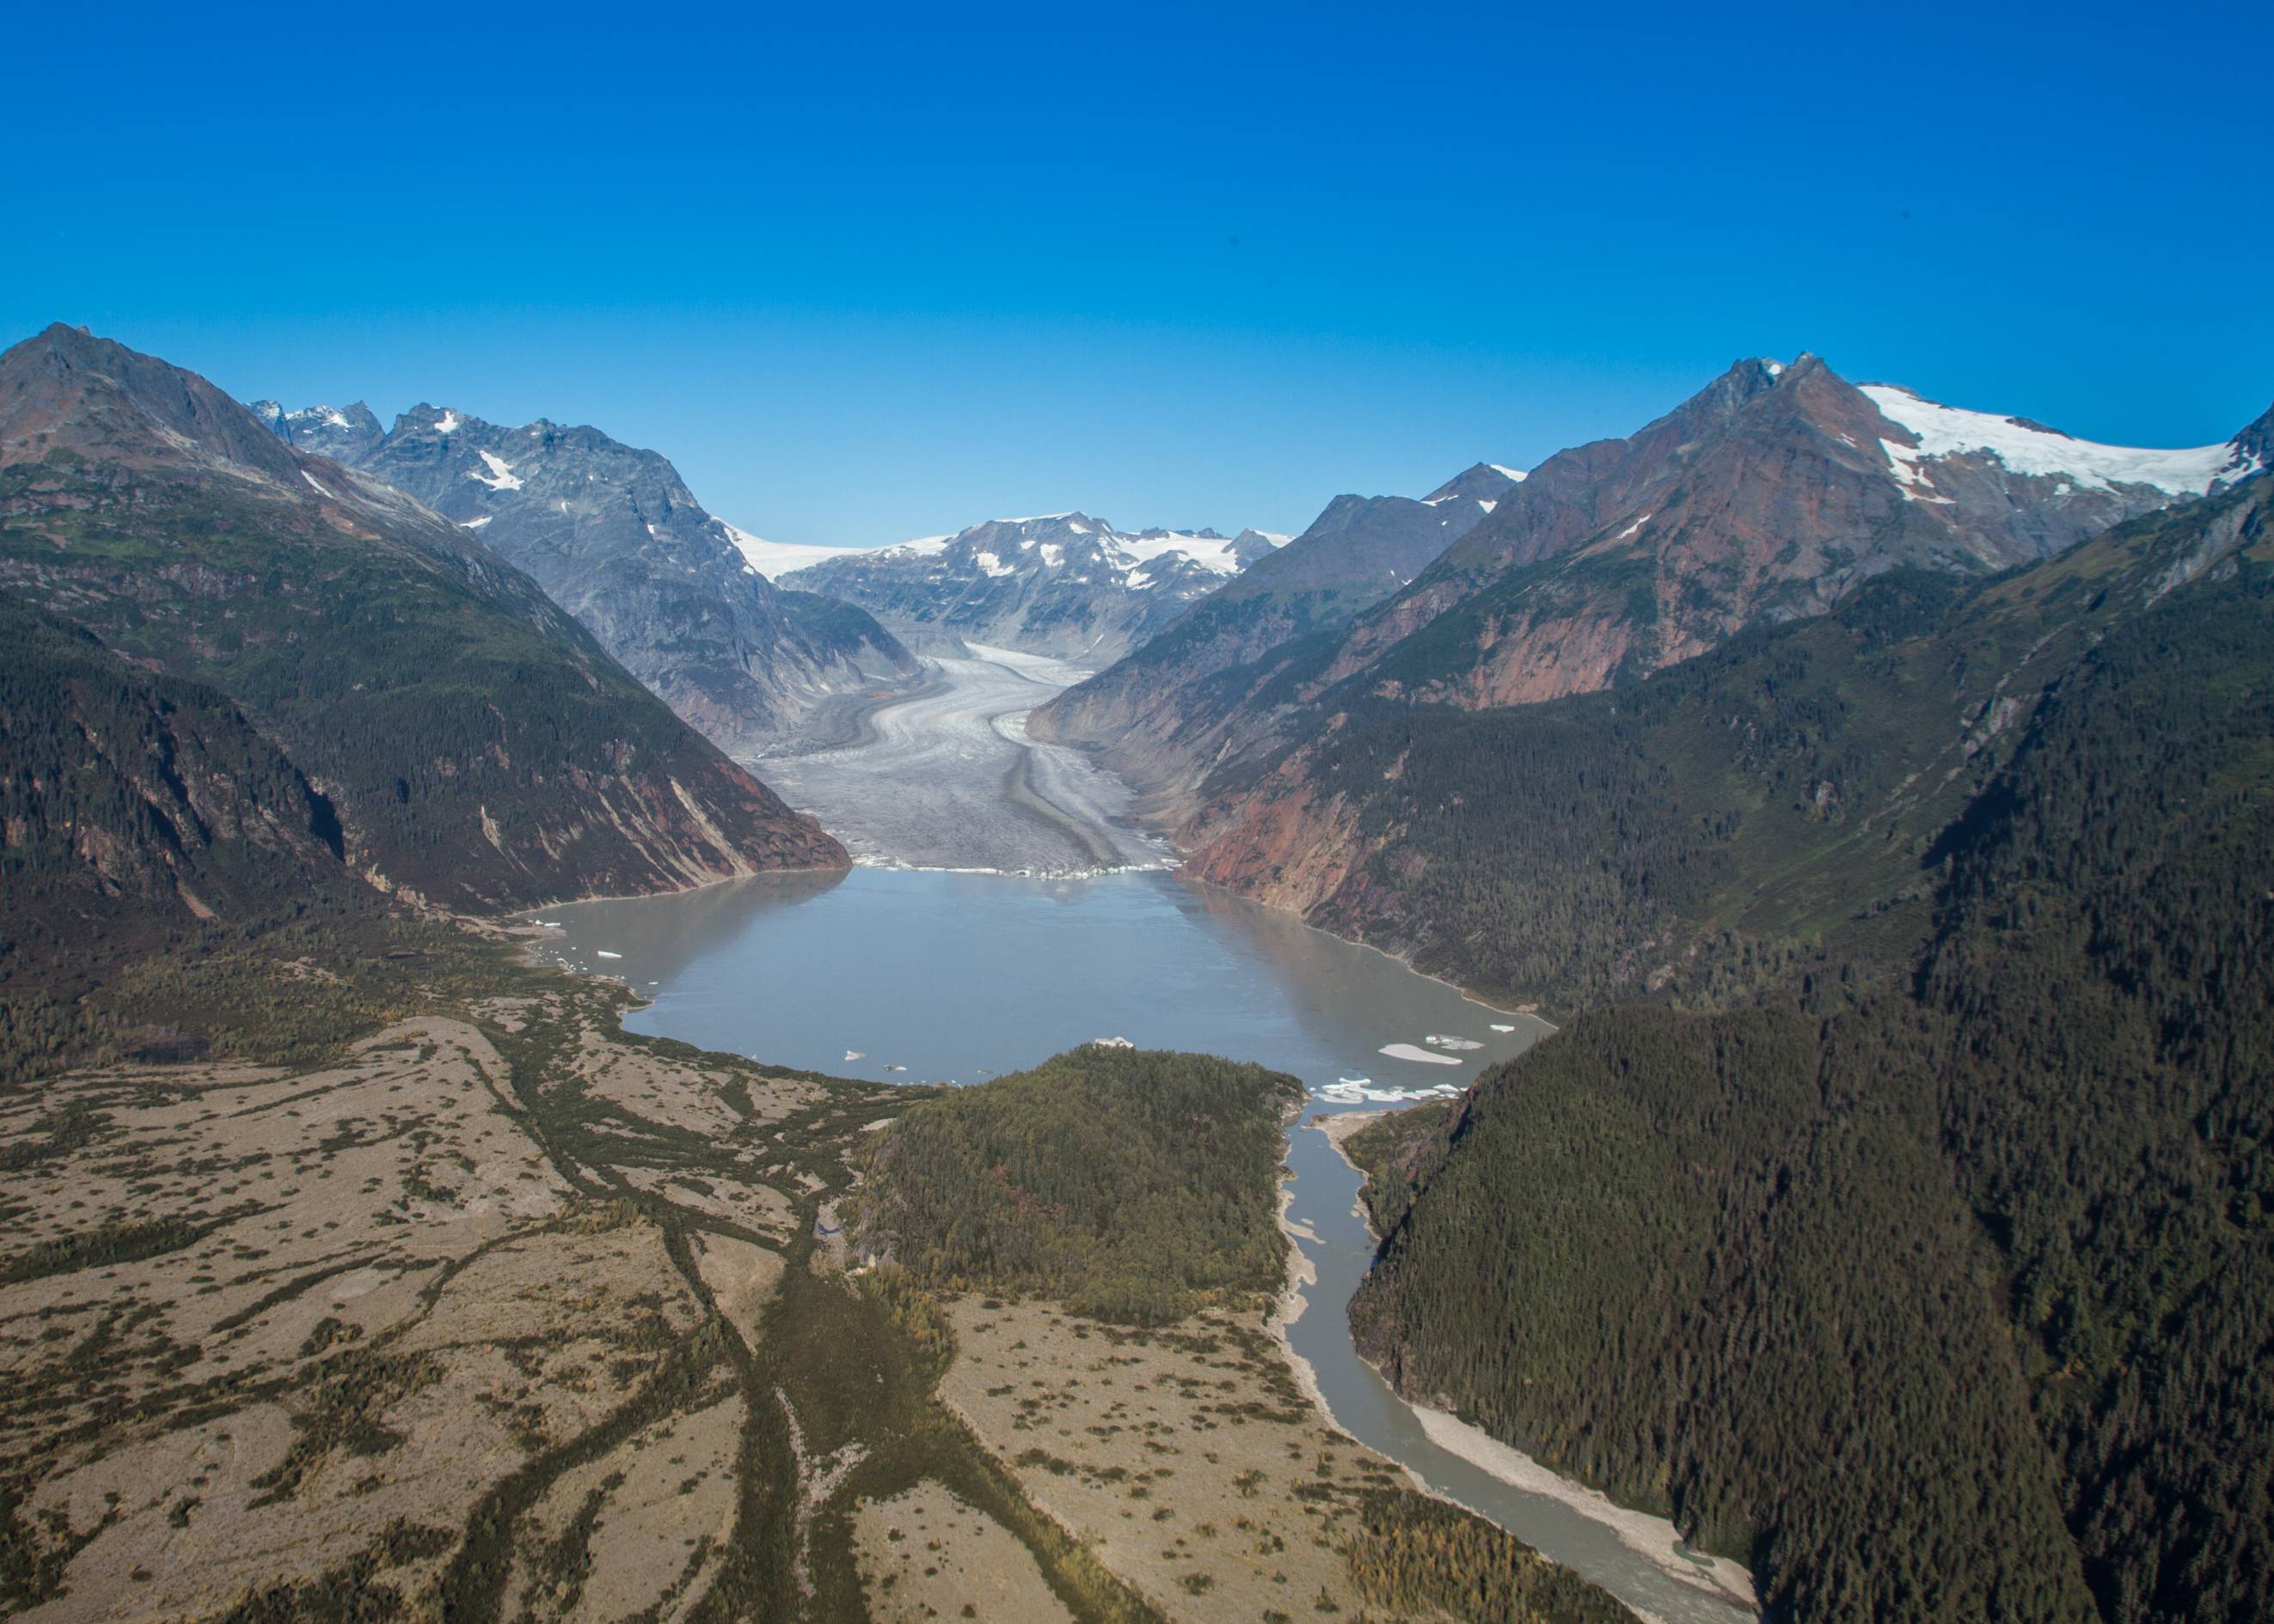 A view of the watershed: glacial water drainage bounded by high ridge lines.